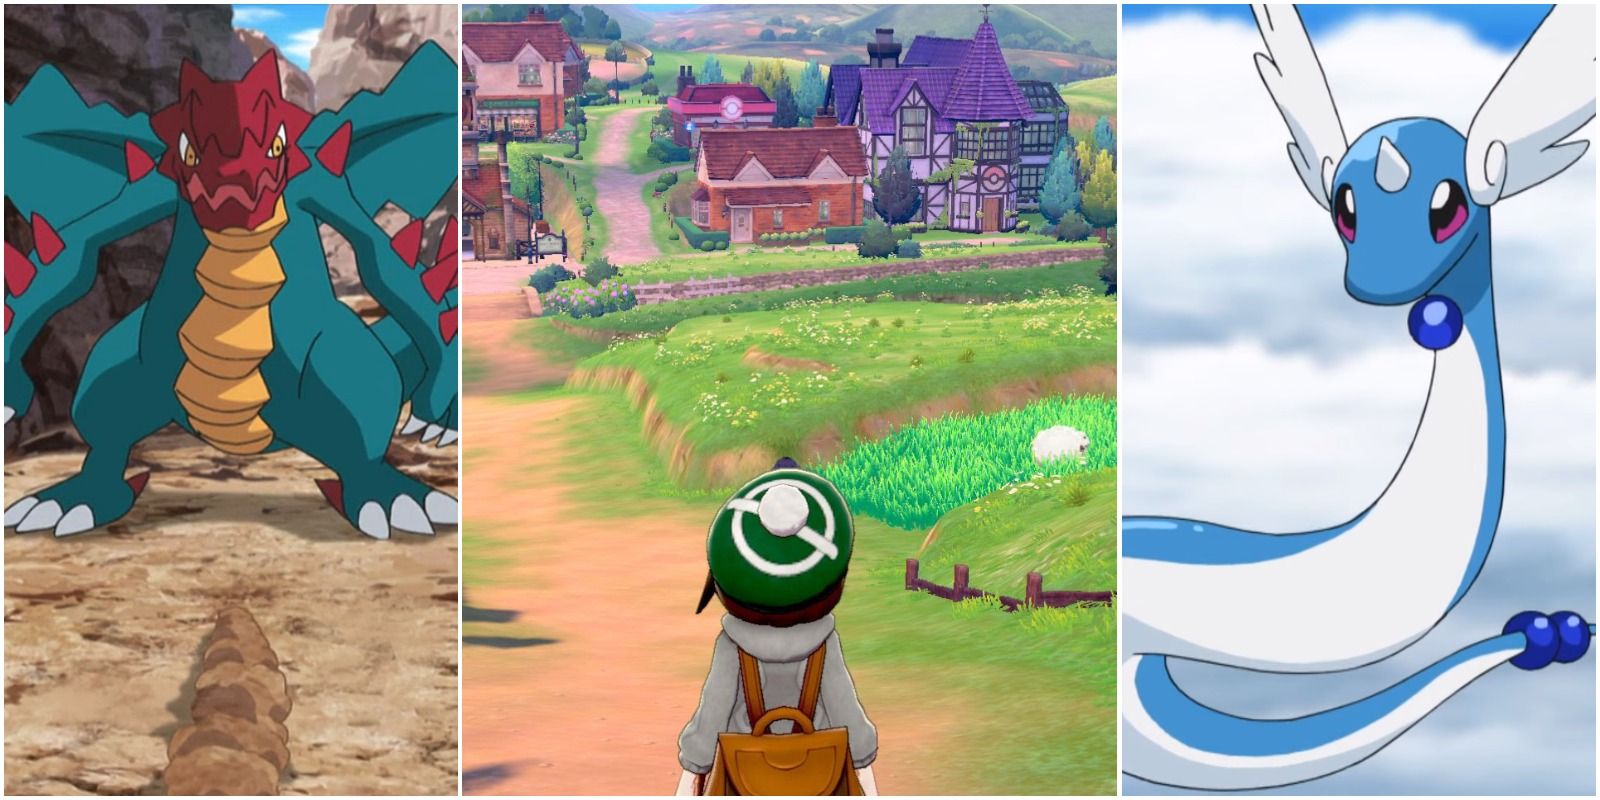 Pokemon Sword & Shield: The Best Pokemon Types To Use In Each Gym